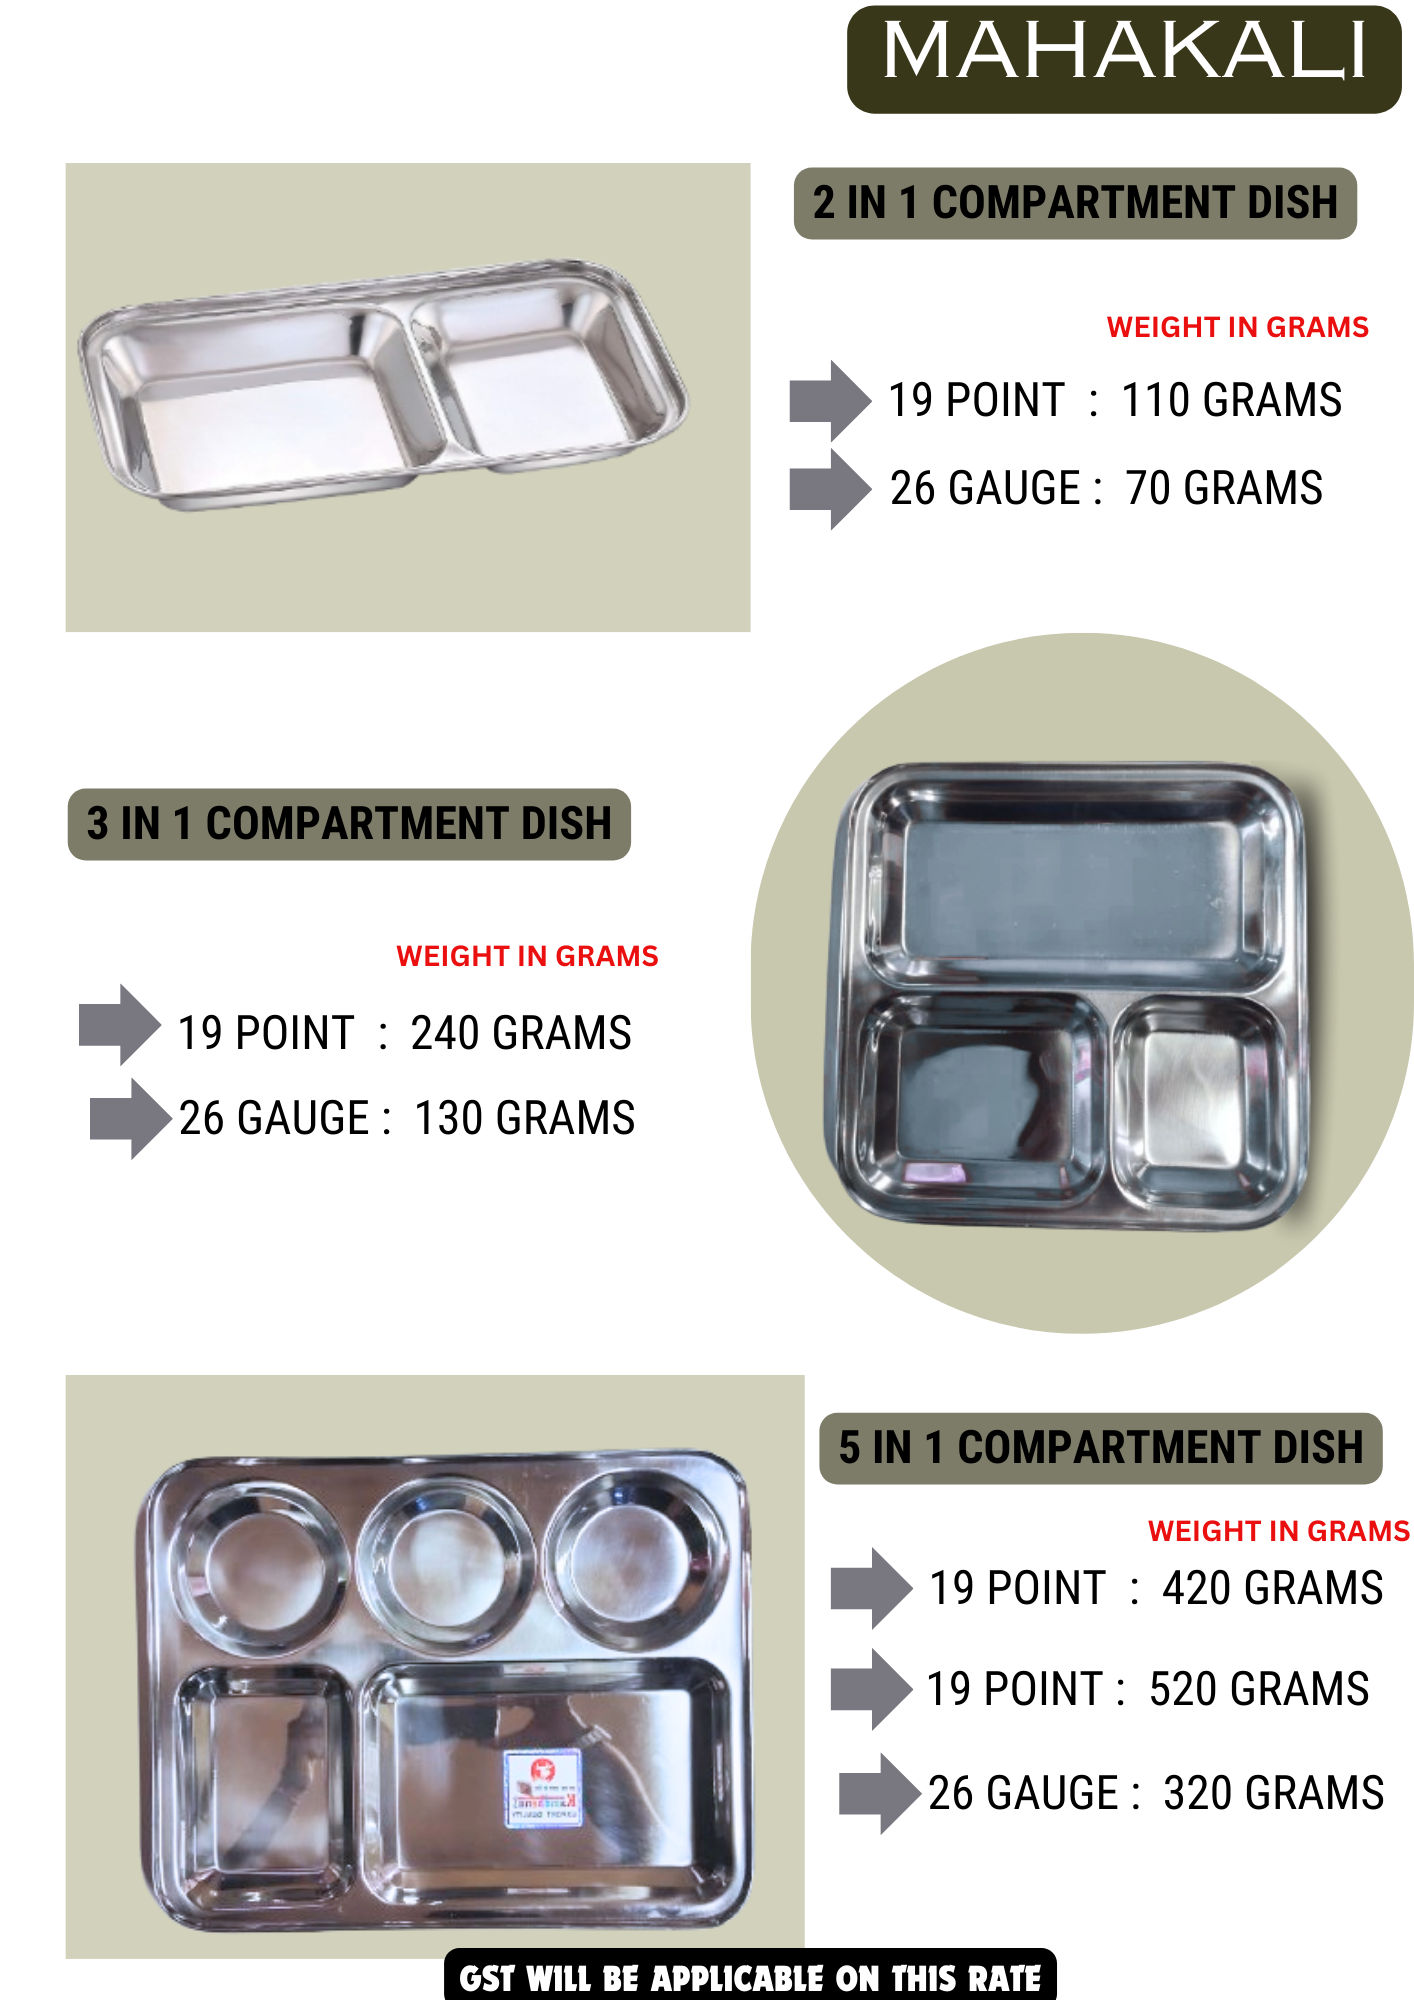 Stainless steel compartment dish- 19 point